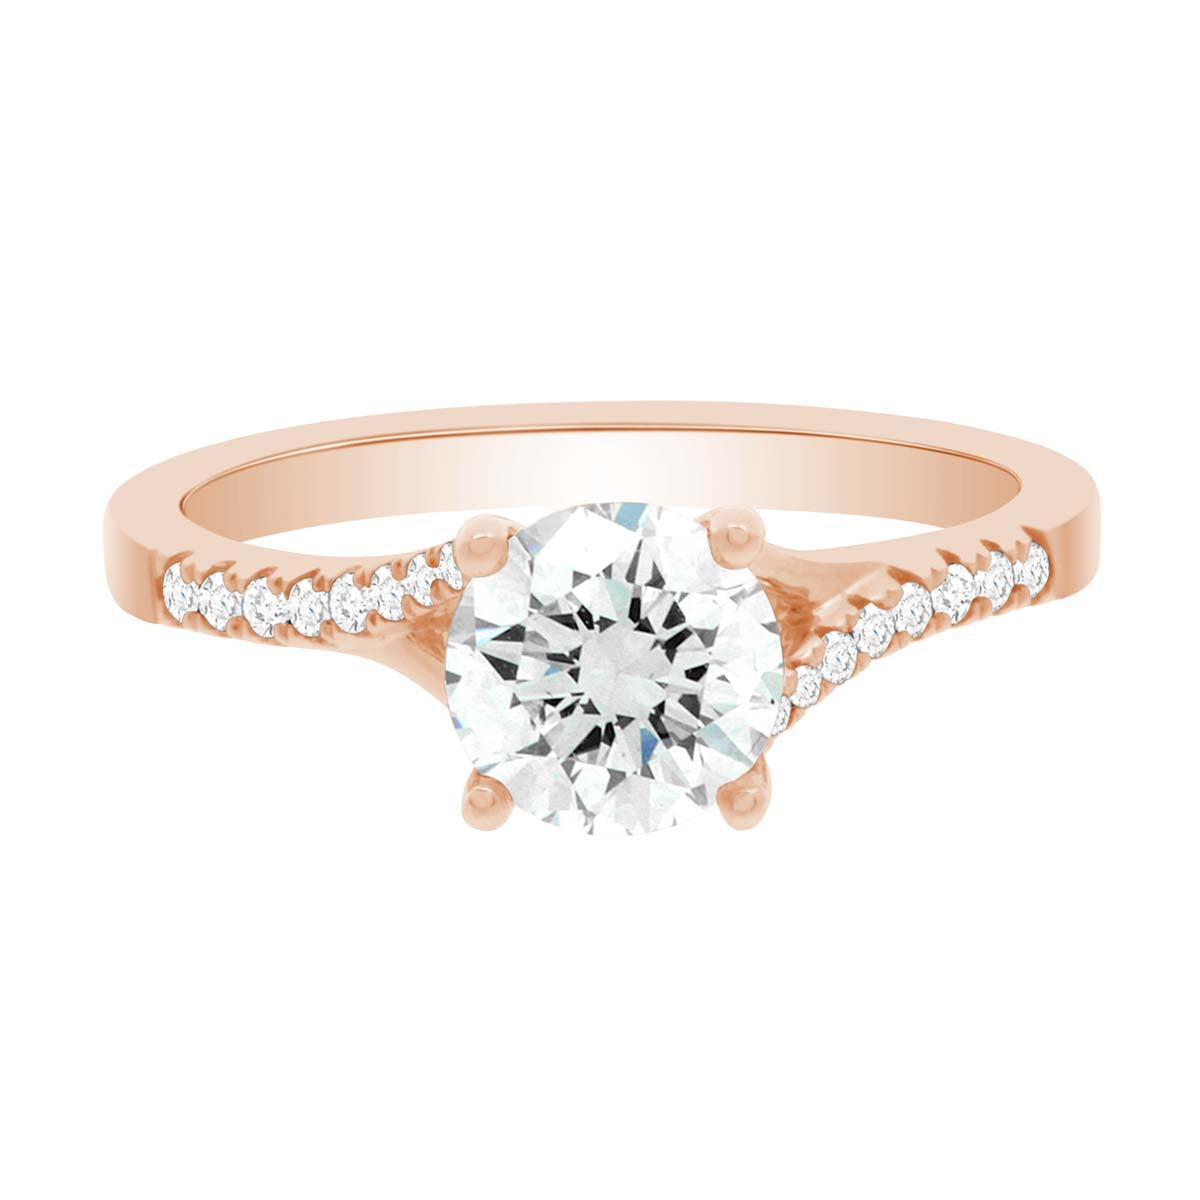 Crossover Solitaire Ring made from 18kt rose gold